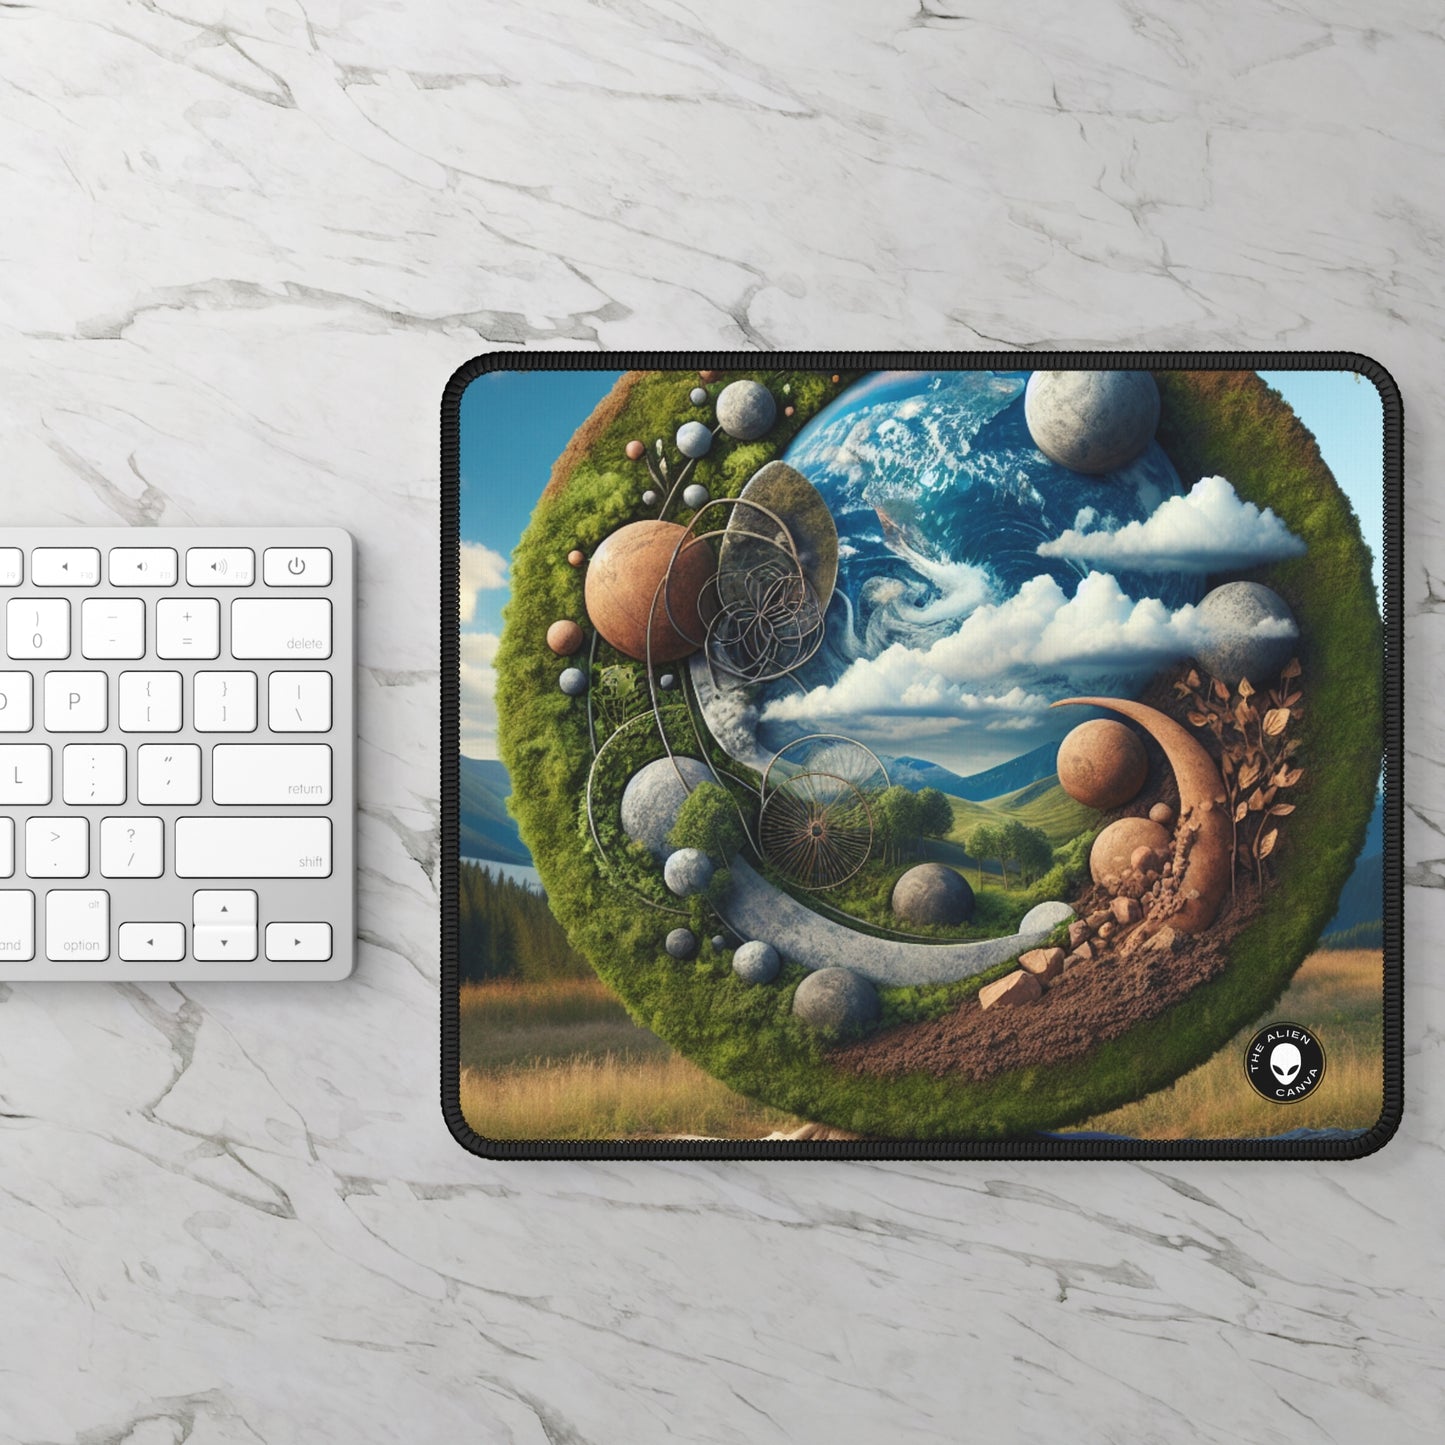 "Sahara Sands: Aerial Earth Art Installation" - The Alien Gaming Mouse Pad Earth Art